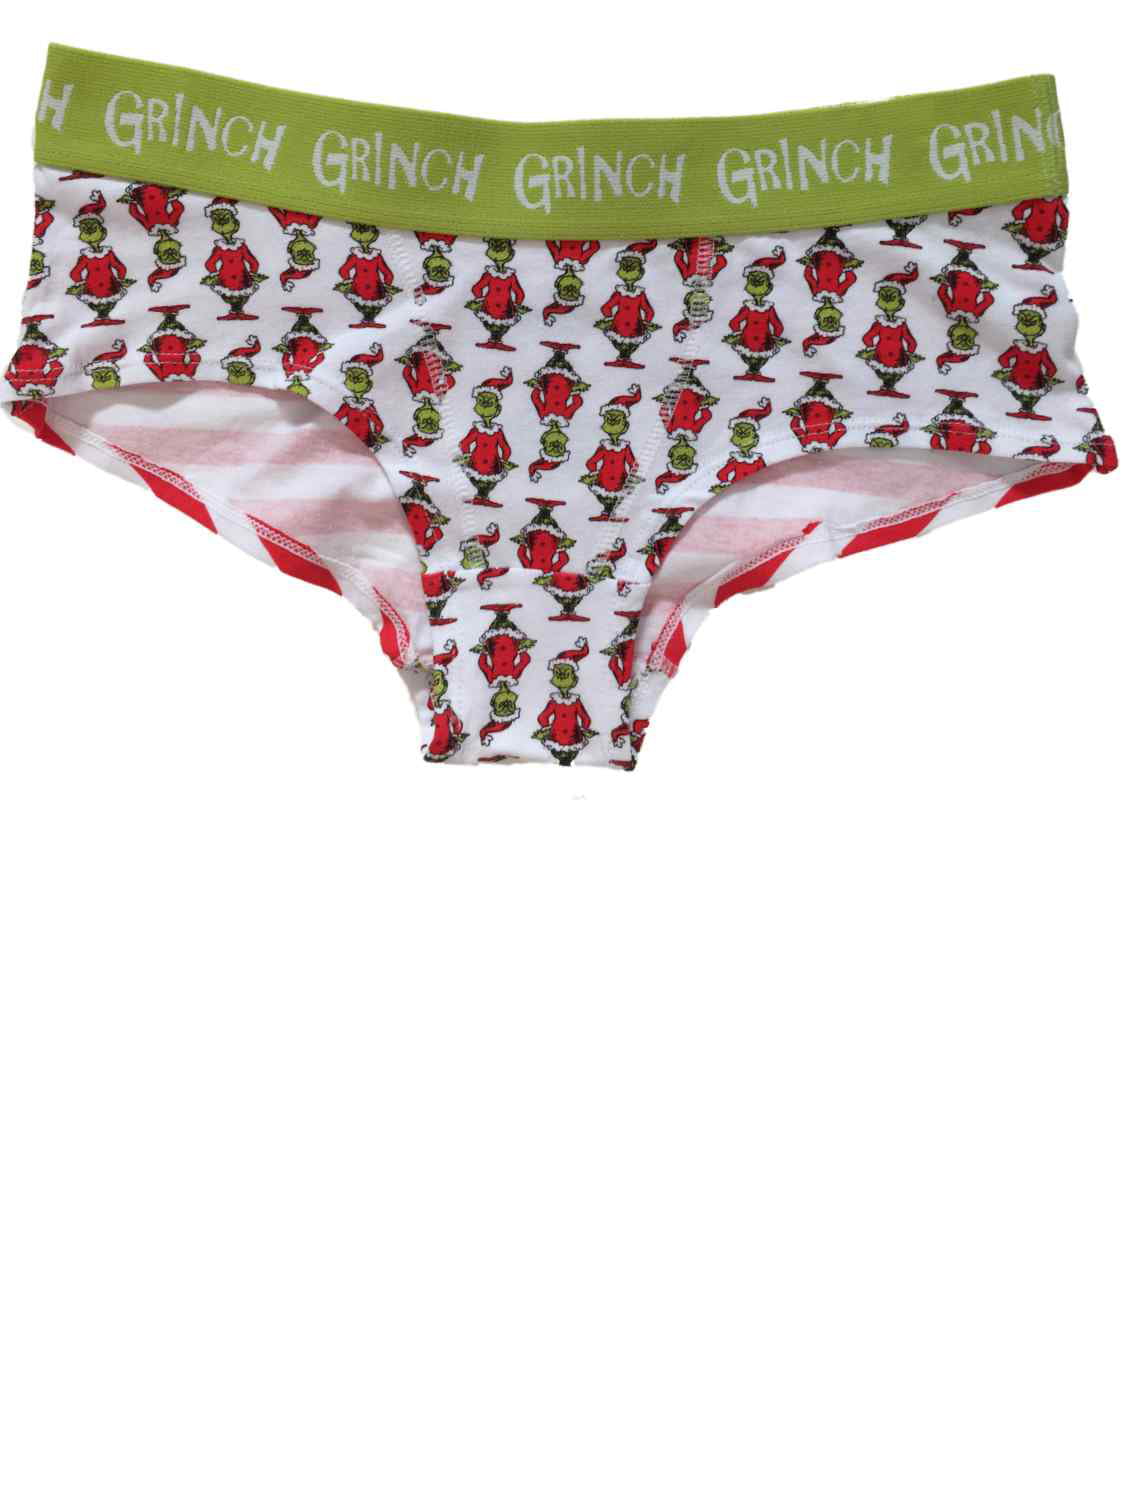 Dr Seuss How The Grinch Stole Christmas Panties Underwear 